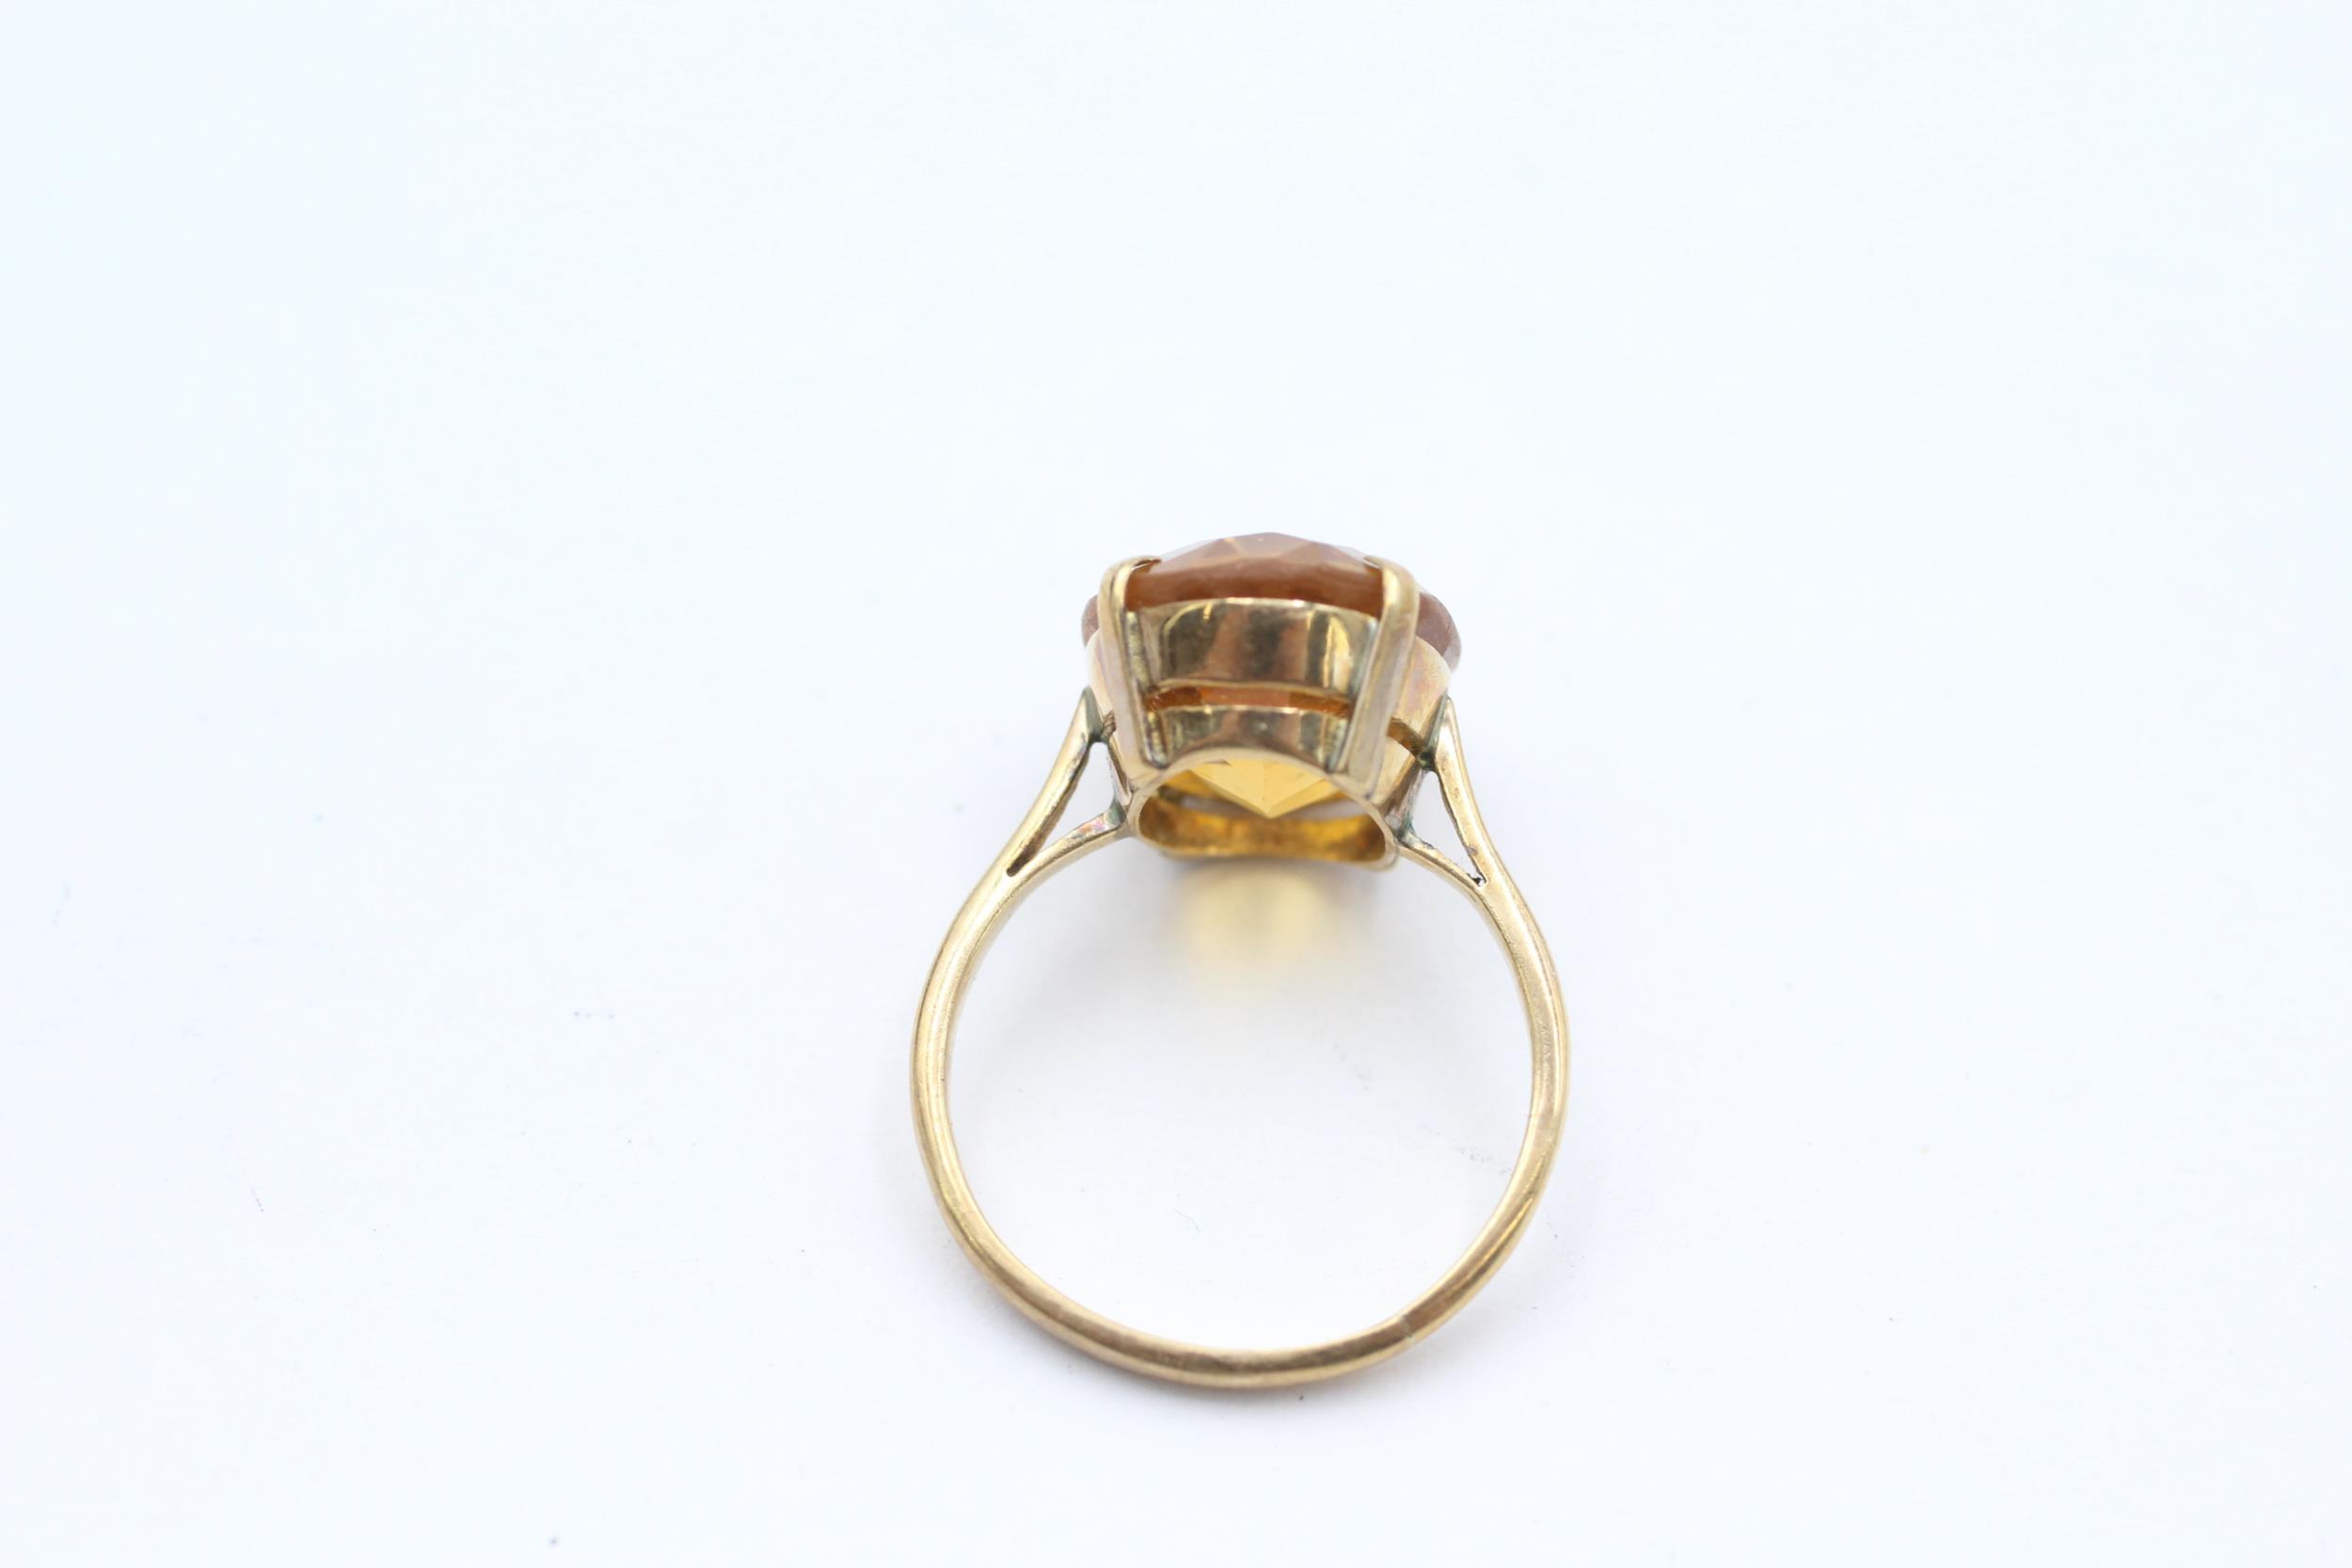 9ct gold oval citrine single stone ring Size L - 3.3 g - Image 4 of 4